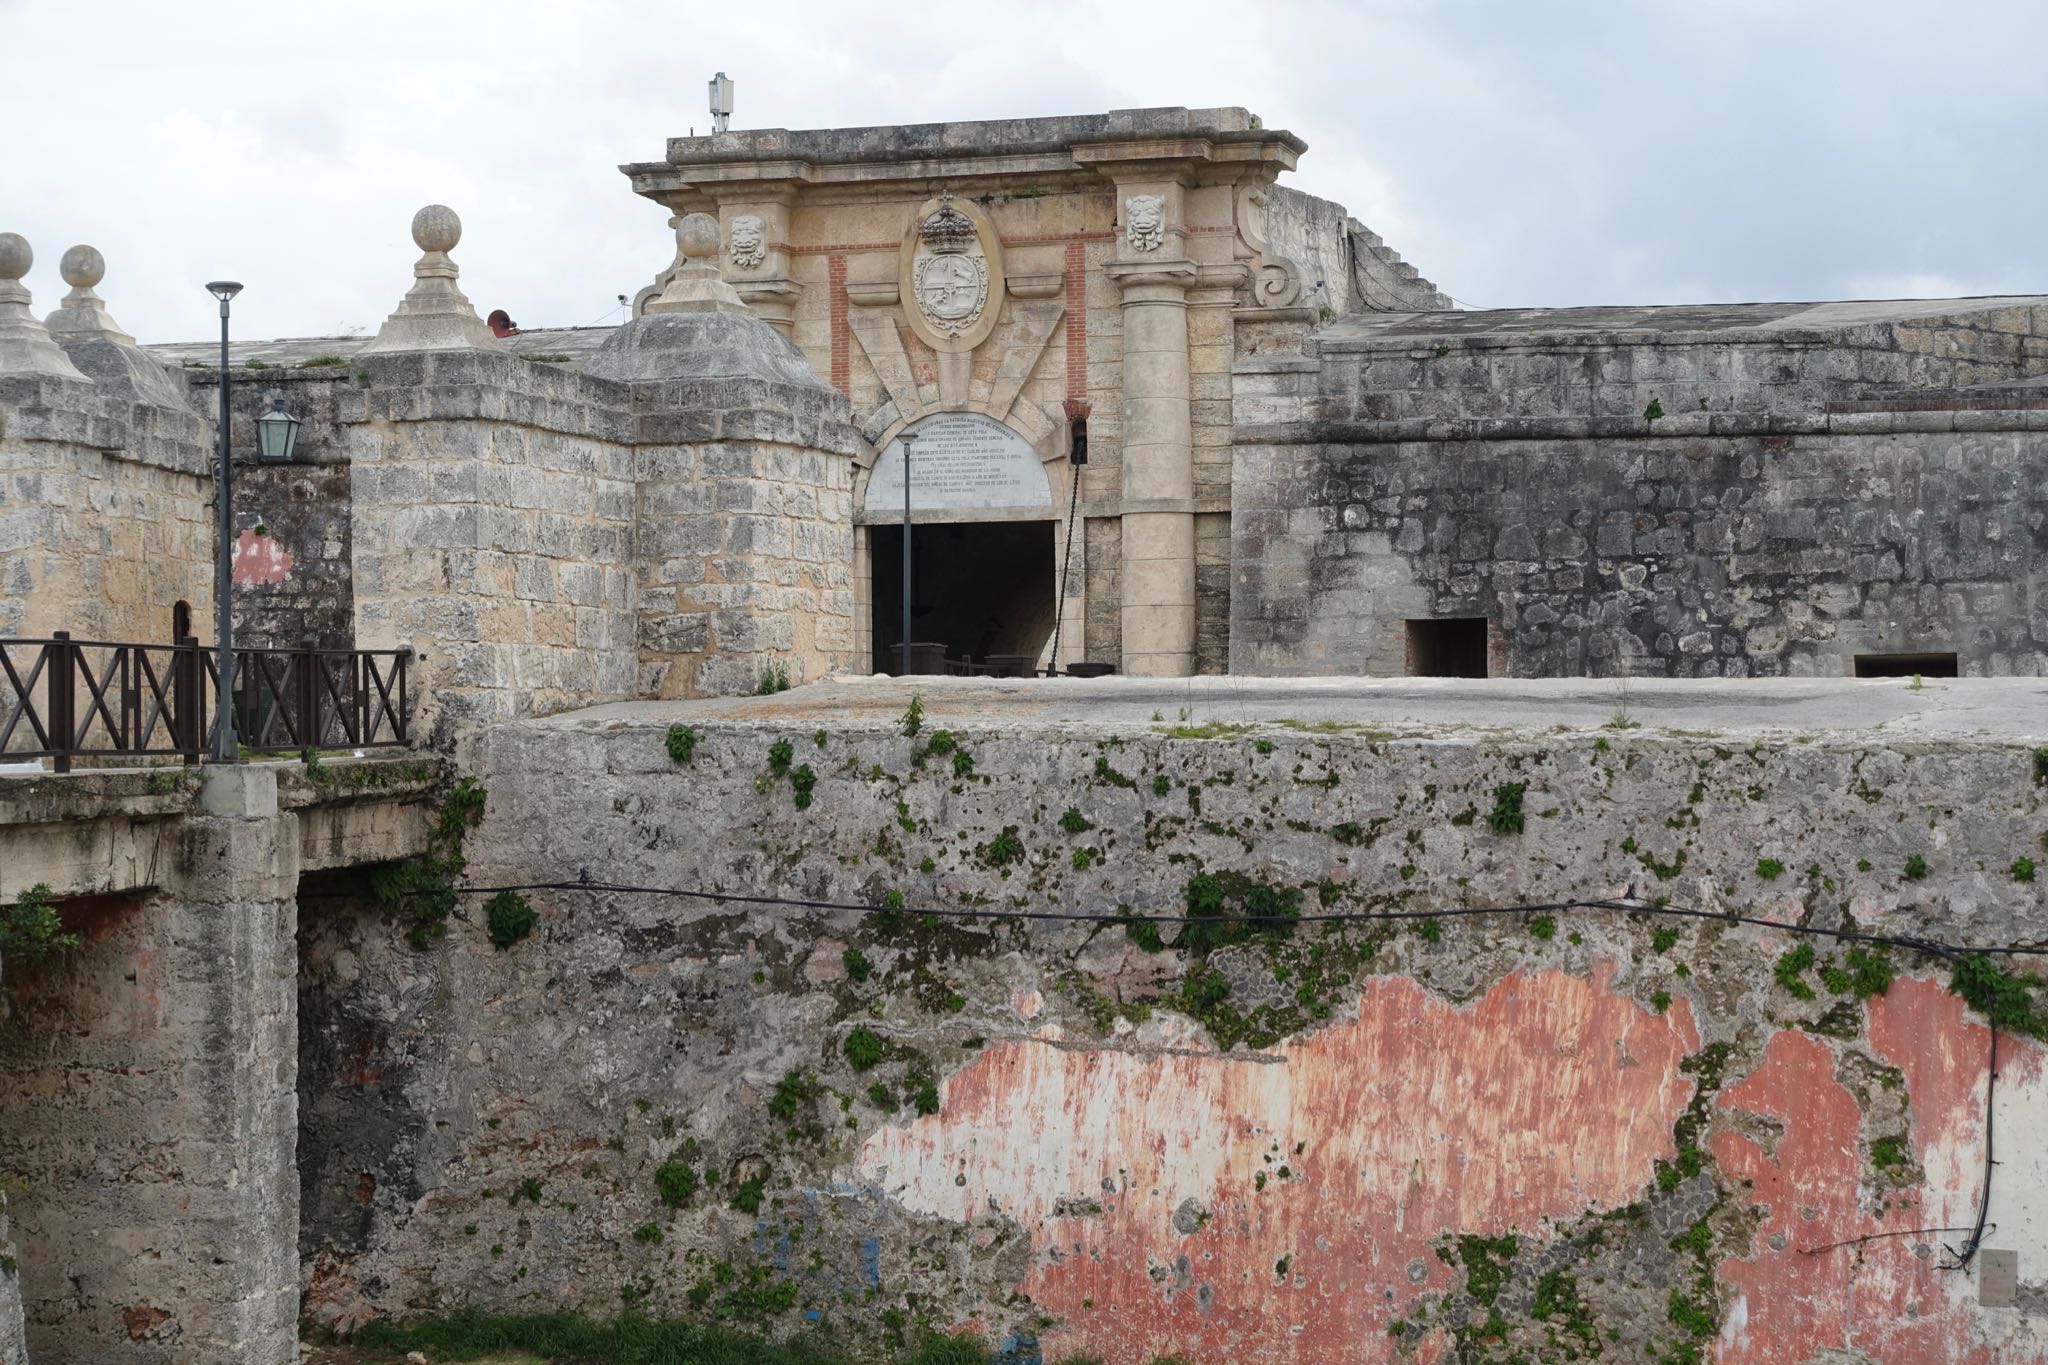 Photo 57 of 221 from the album Highlights Cuba 2019.